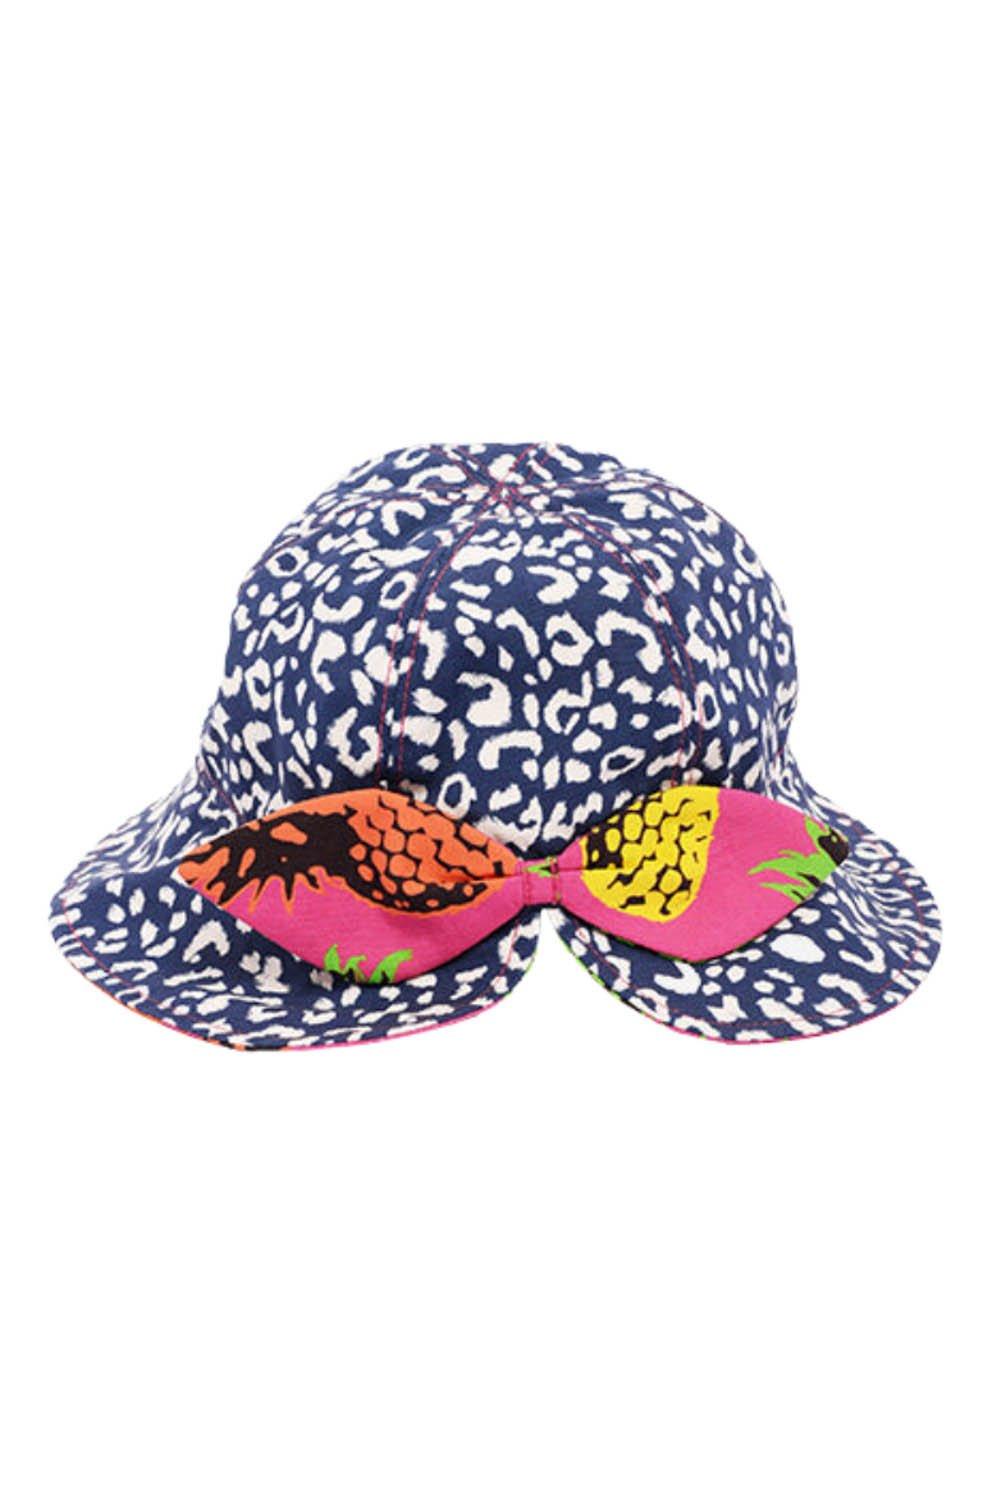 Globetrotter Sun Hat with Chin Strap